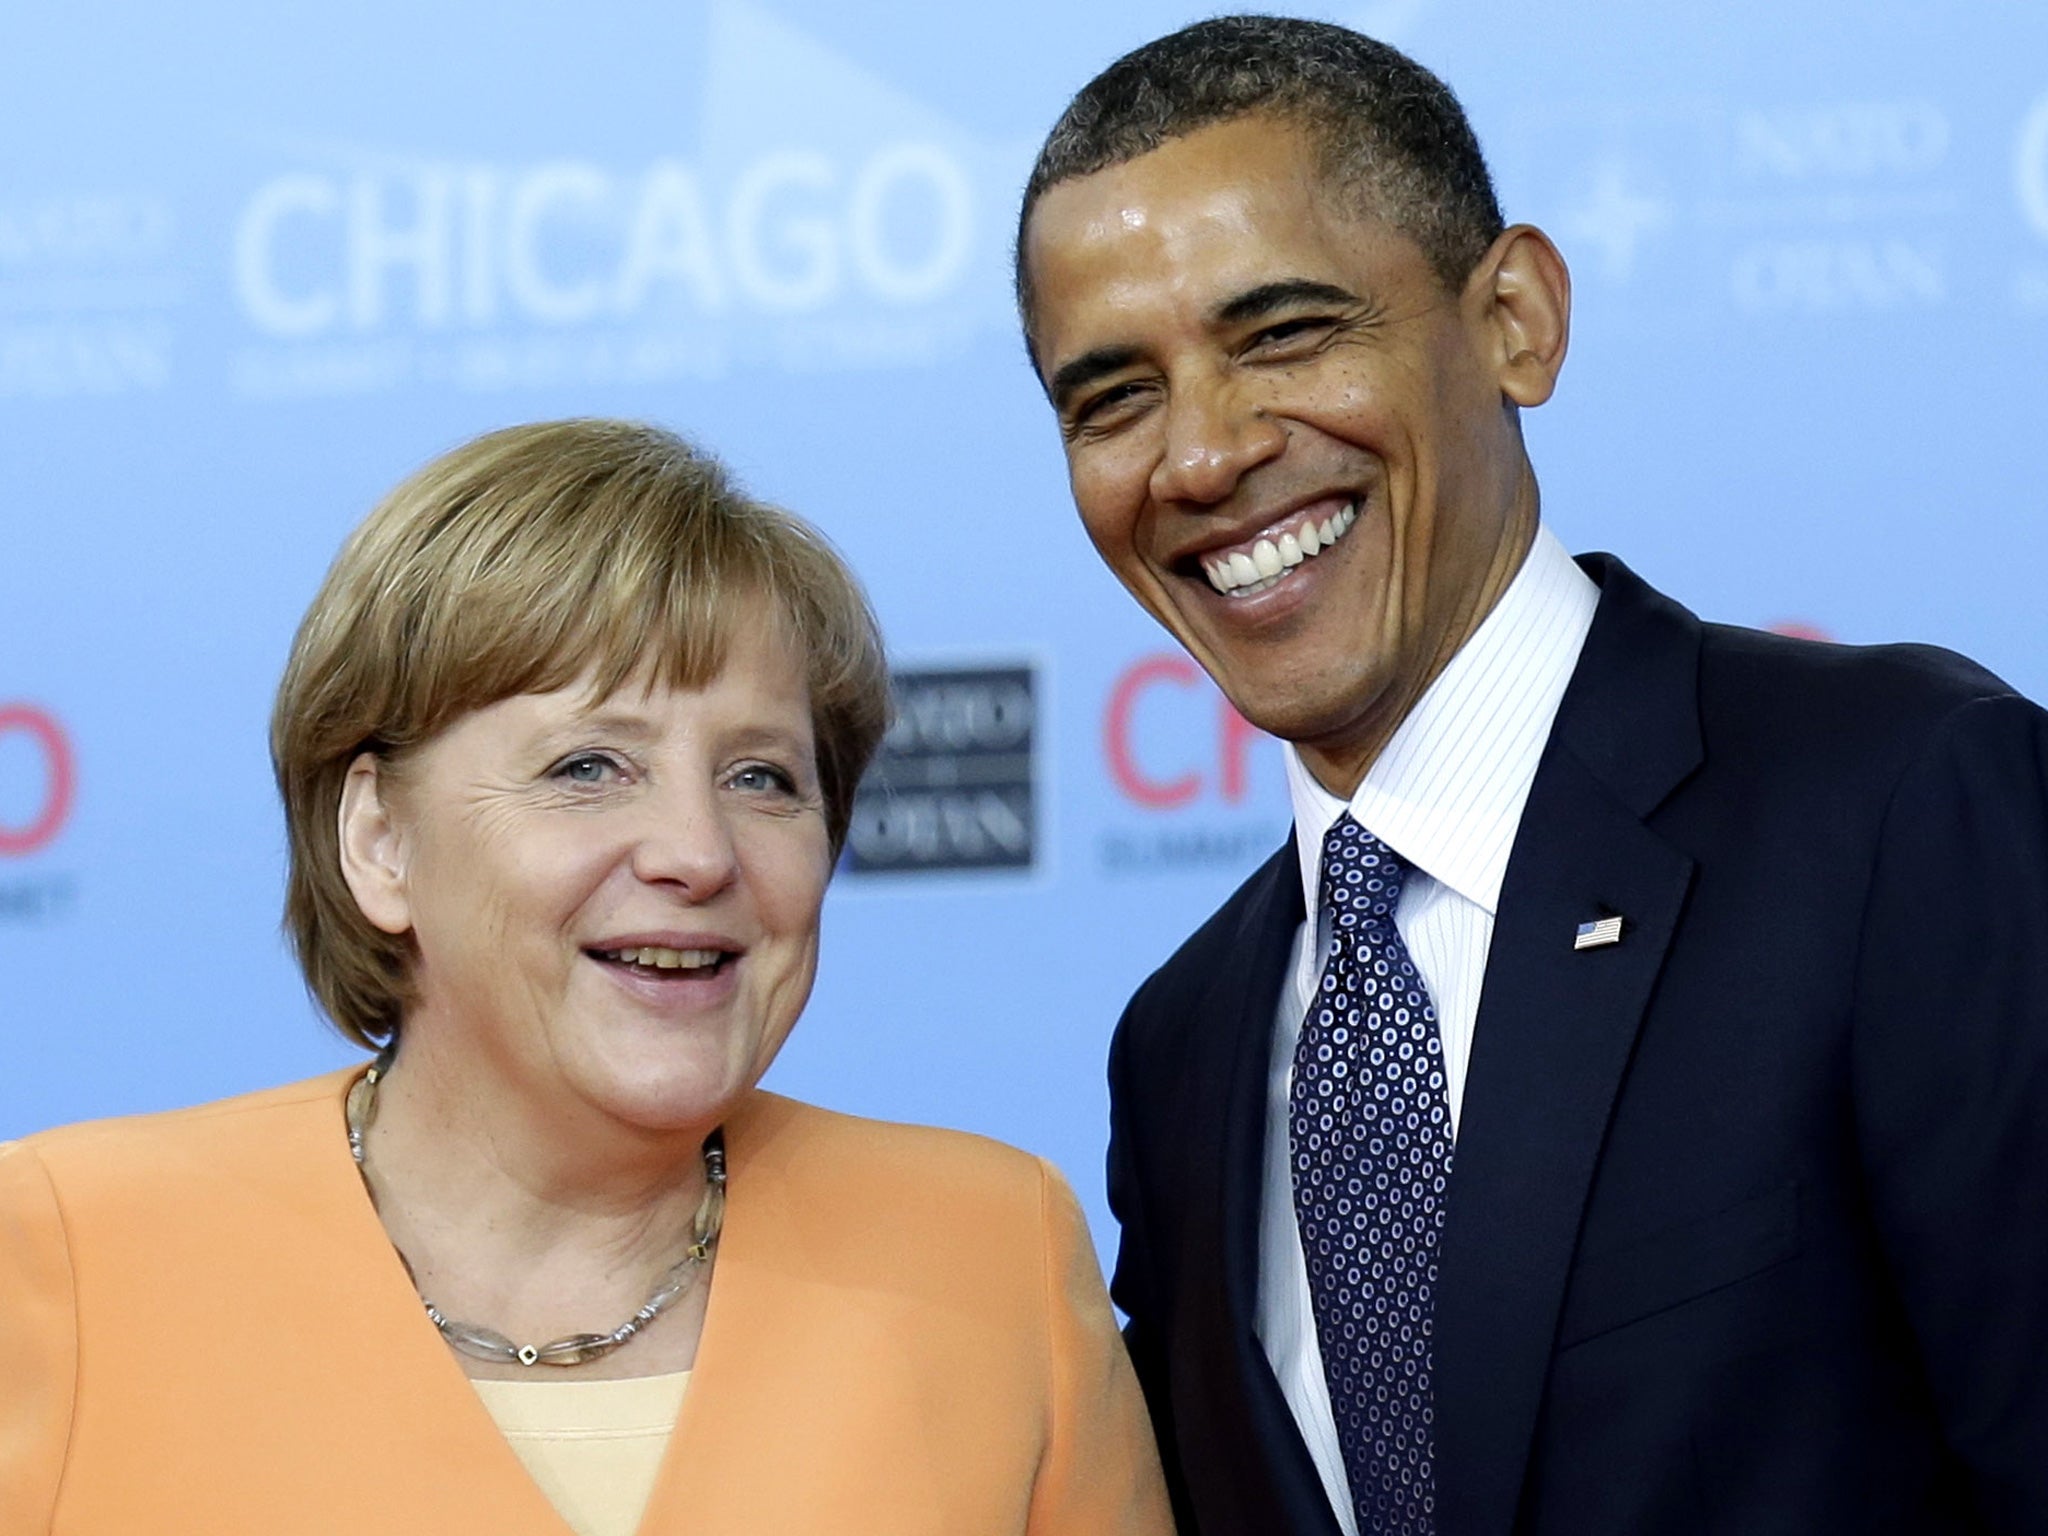 President Obama should get up closer to EU leaders including German Chancellor Angela Merkel, suggests employers’ body the CBI